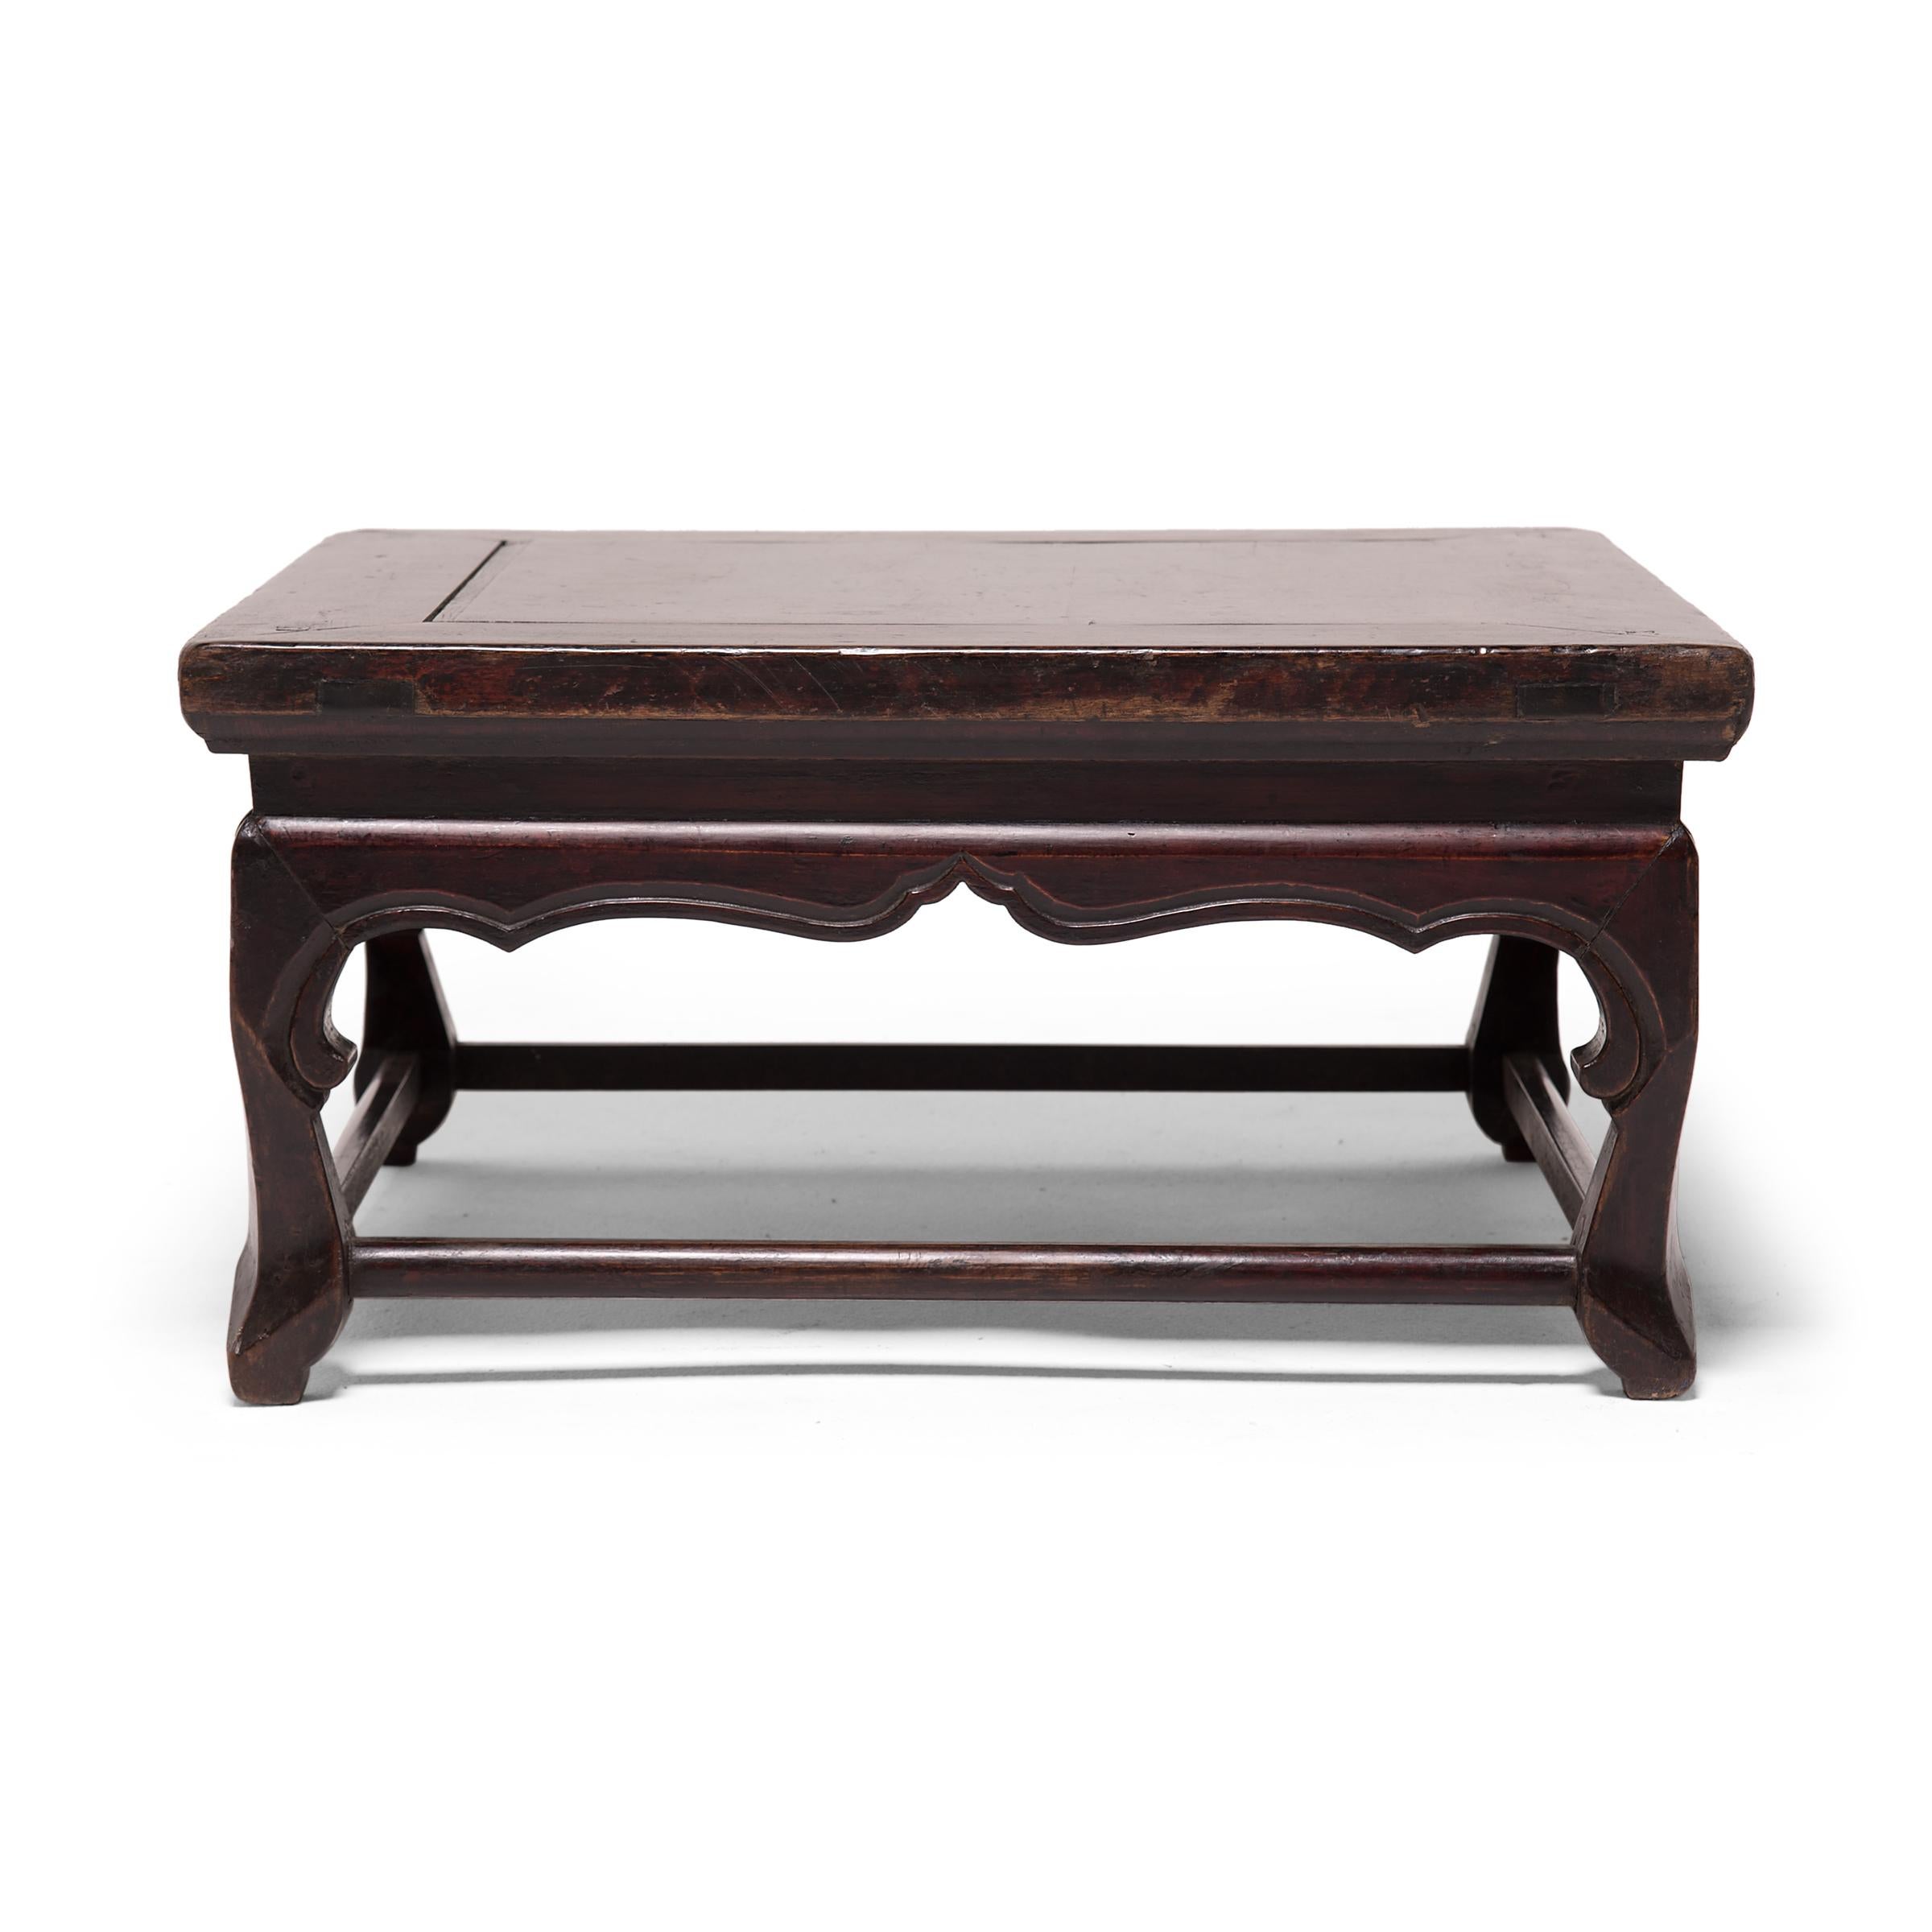 Qing Chinese Low Waisted Kang Table, c. 1850